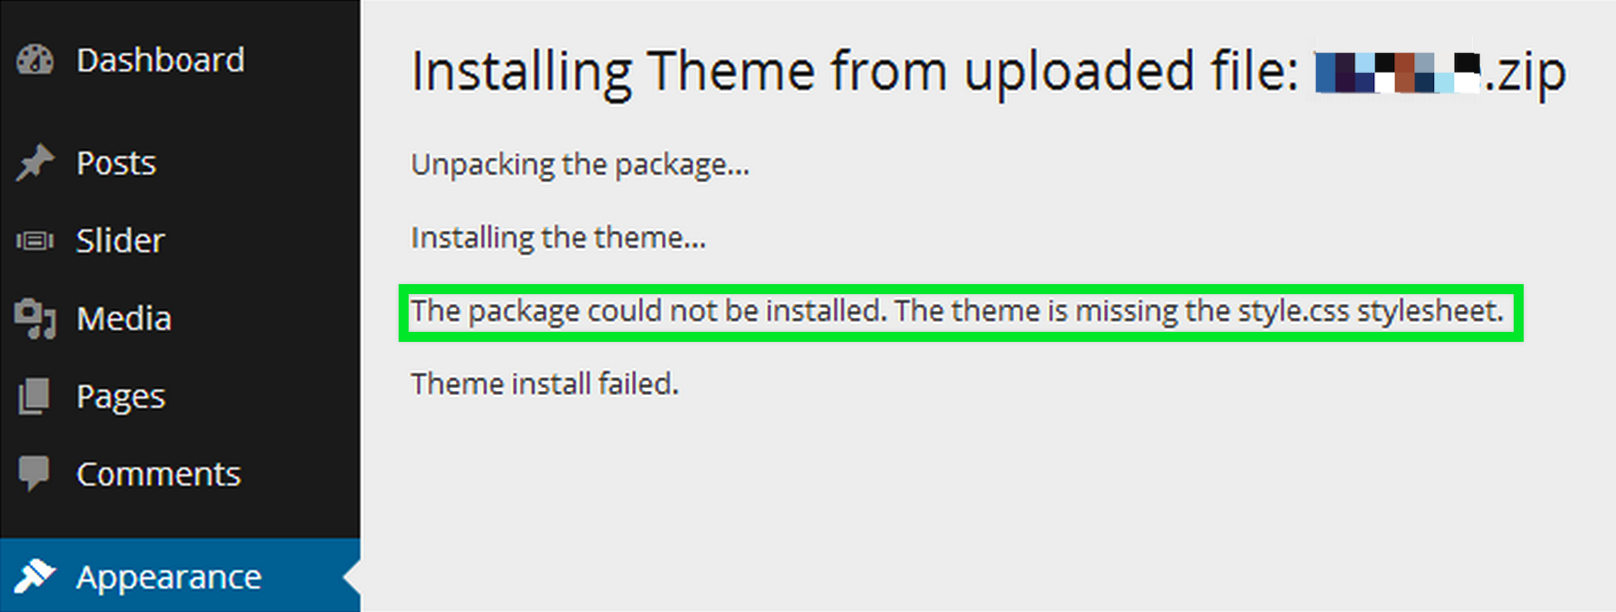 An installation support file could not be installed